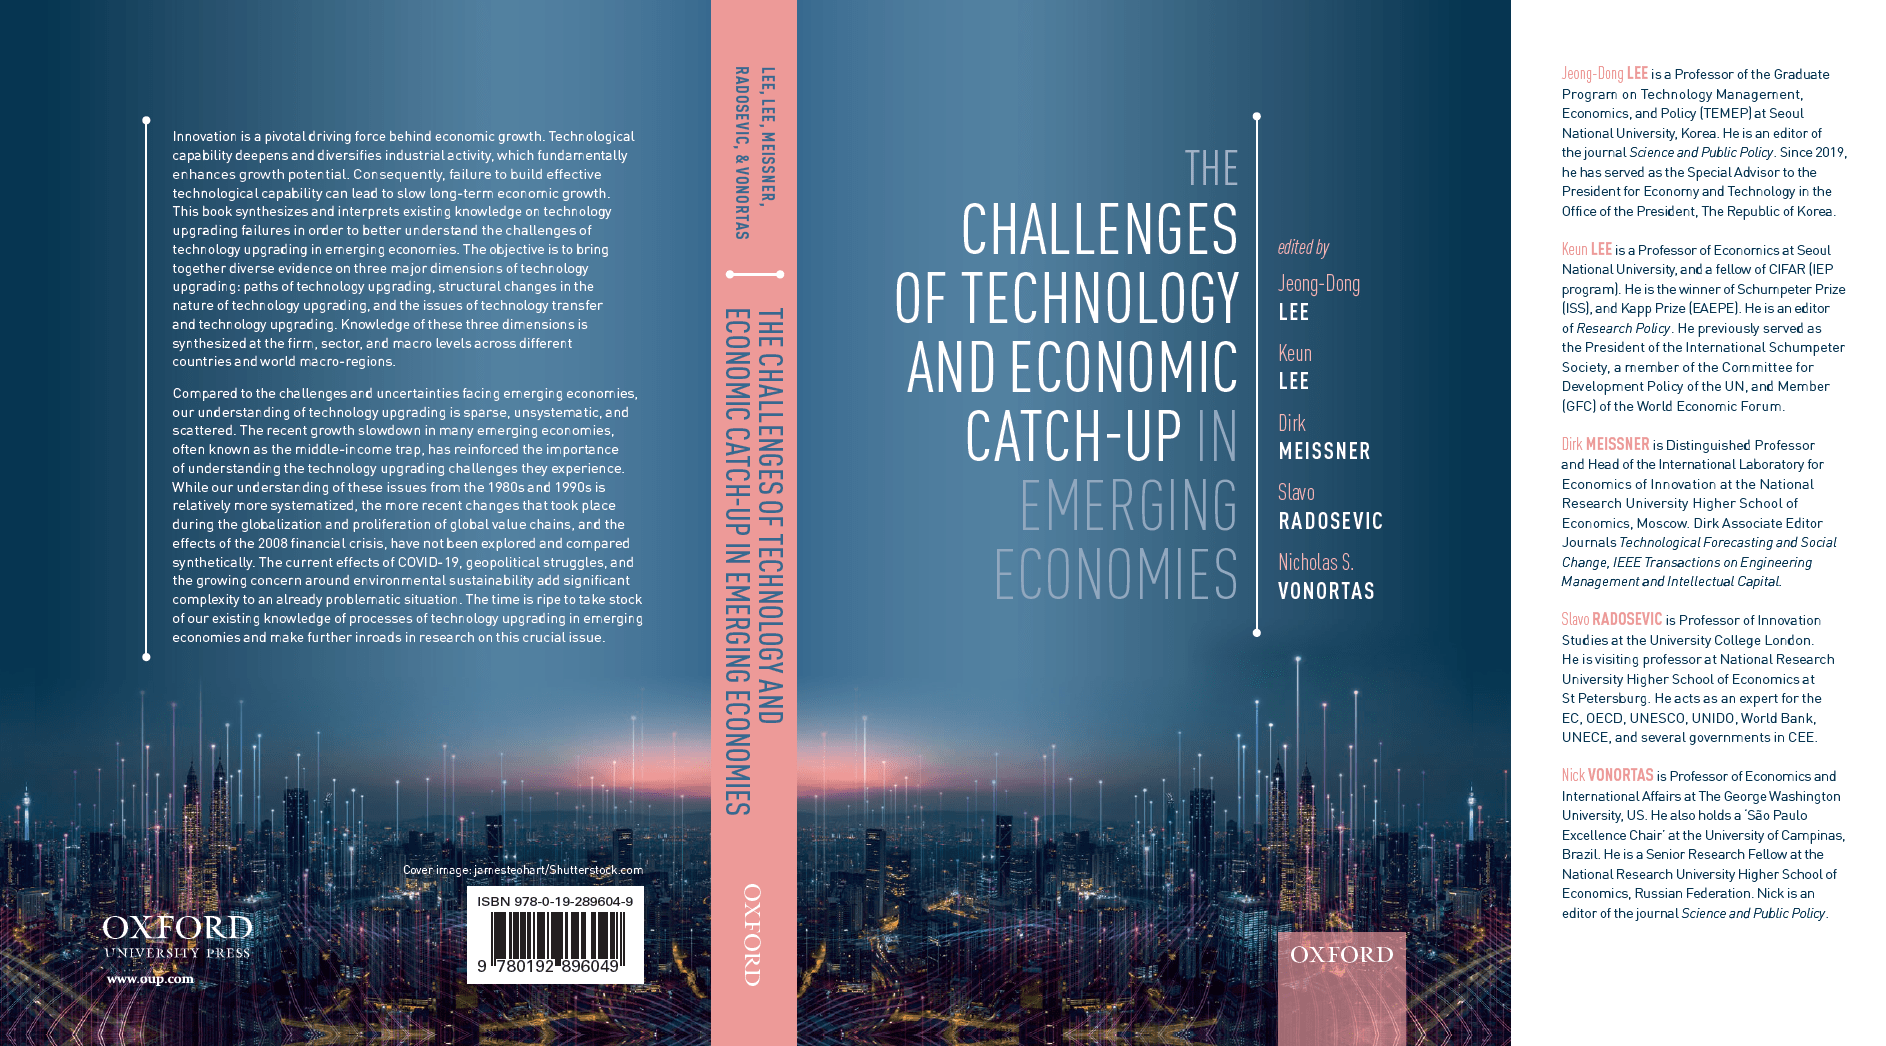 Book Jacket Image for The Challenges of Technology and Economic Catch-Up in Emerging Economies